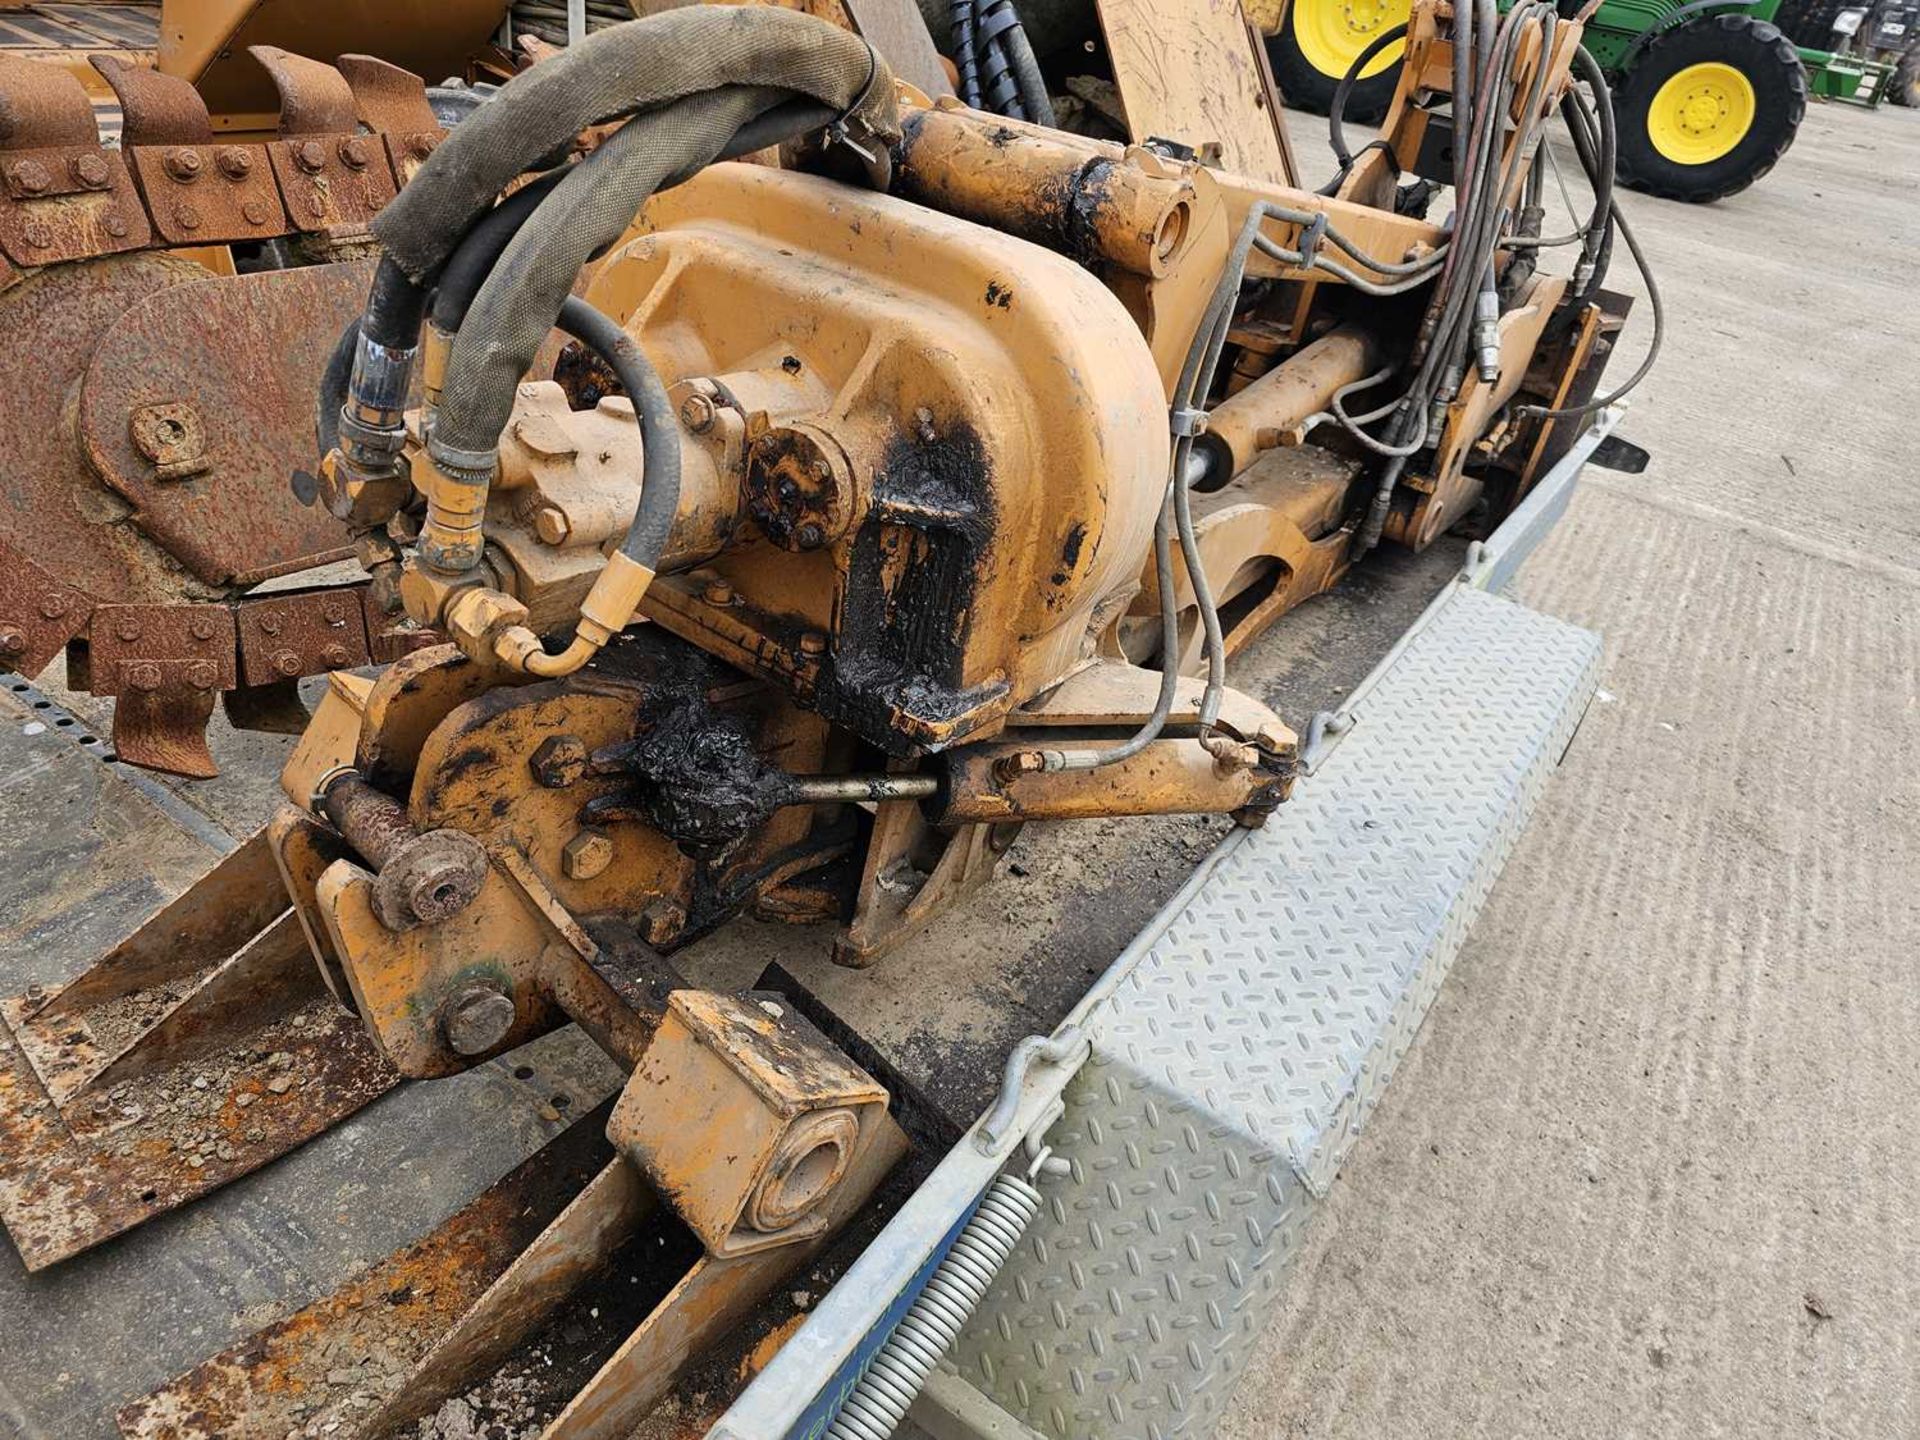 Case 660 4WD 4WS Trencher with TC450 Top Cutter, Chain Trencher, Mole Plough - Image 37 of 39